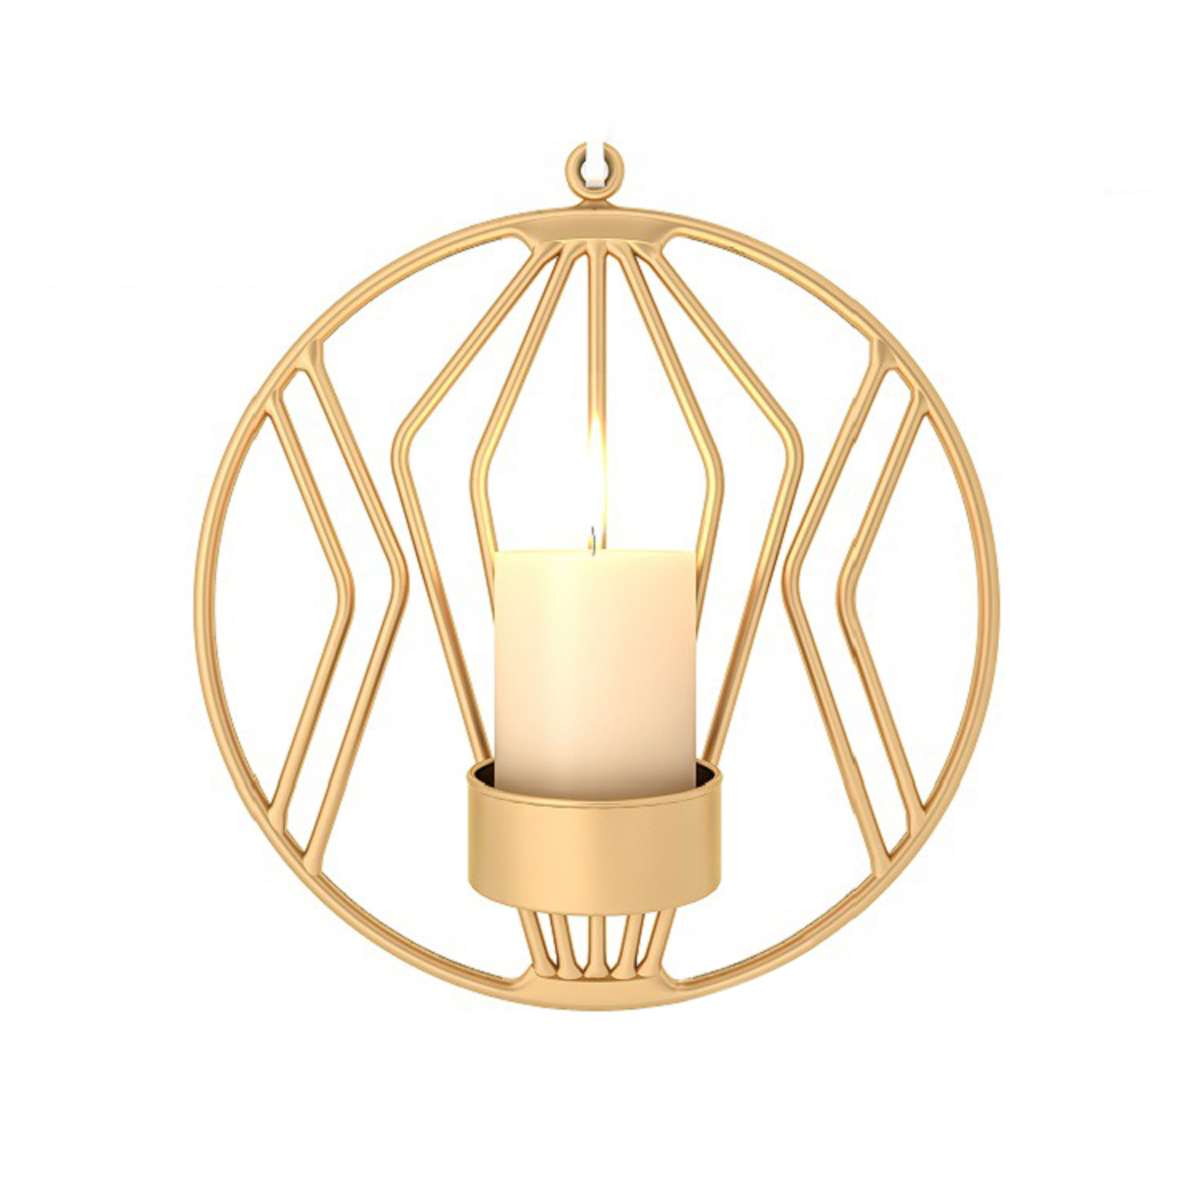 3D-Geometric-Candlestick-Iron-Wall-Candle-Holder-Sconce-Warm-Home-Party-Decor-1727945-9